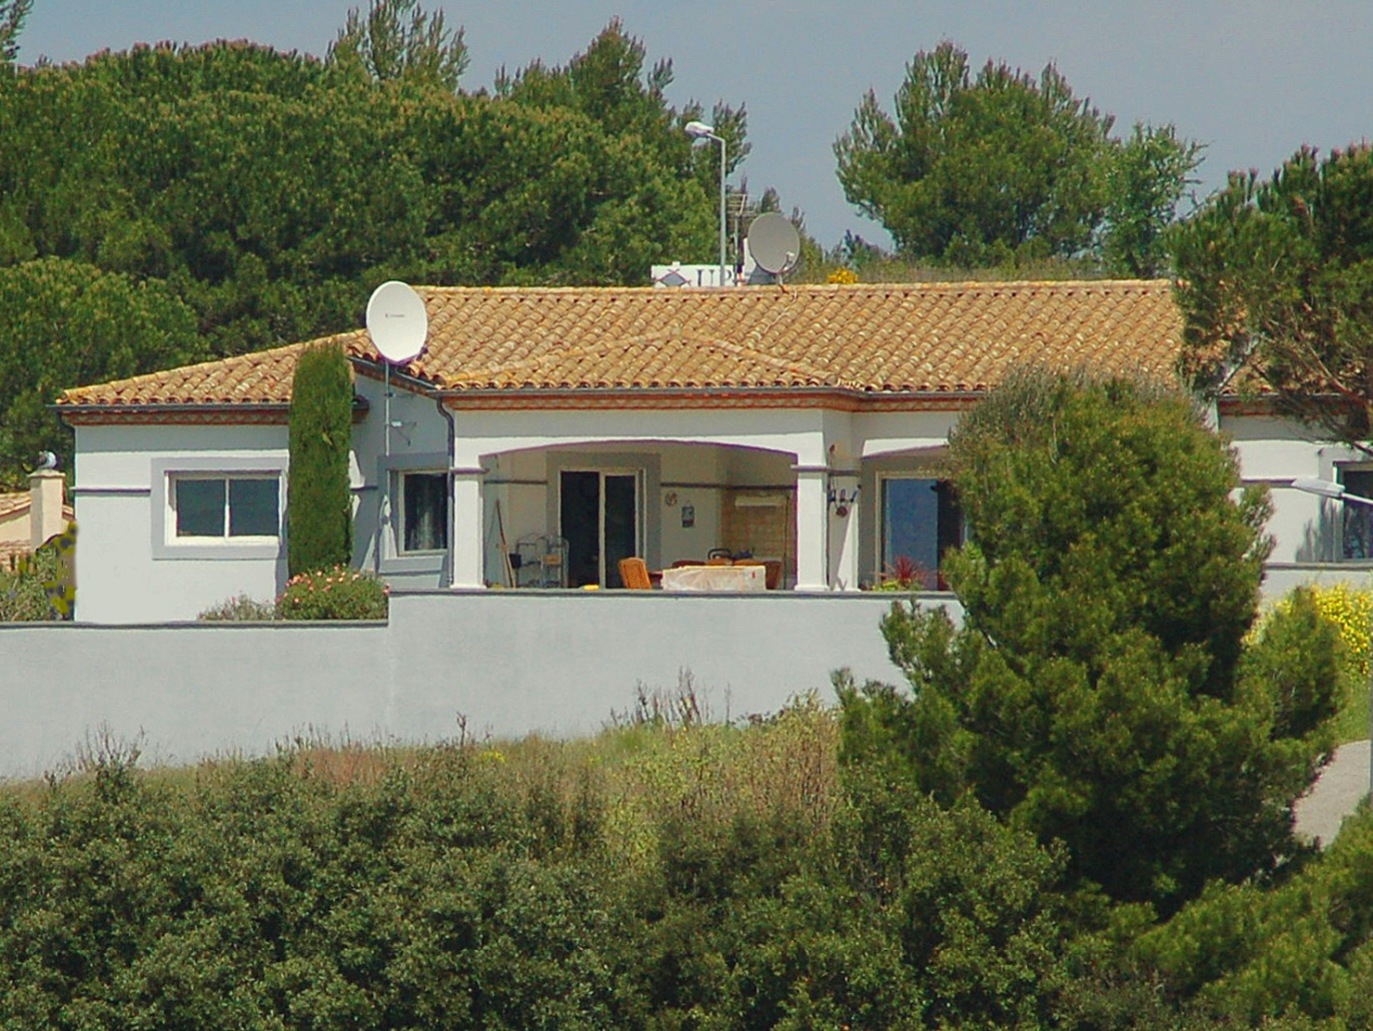 Outside picture of our house on top of the hill overlooking the Pyrenees